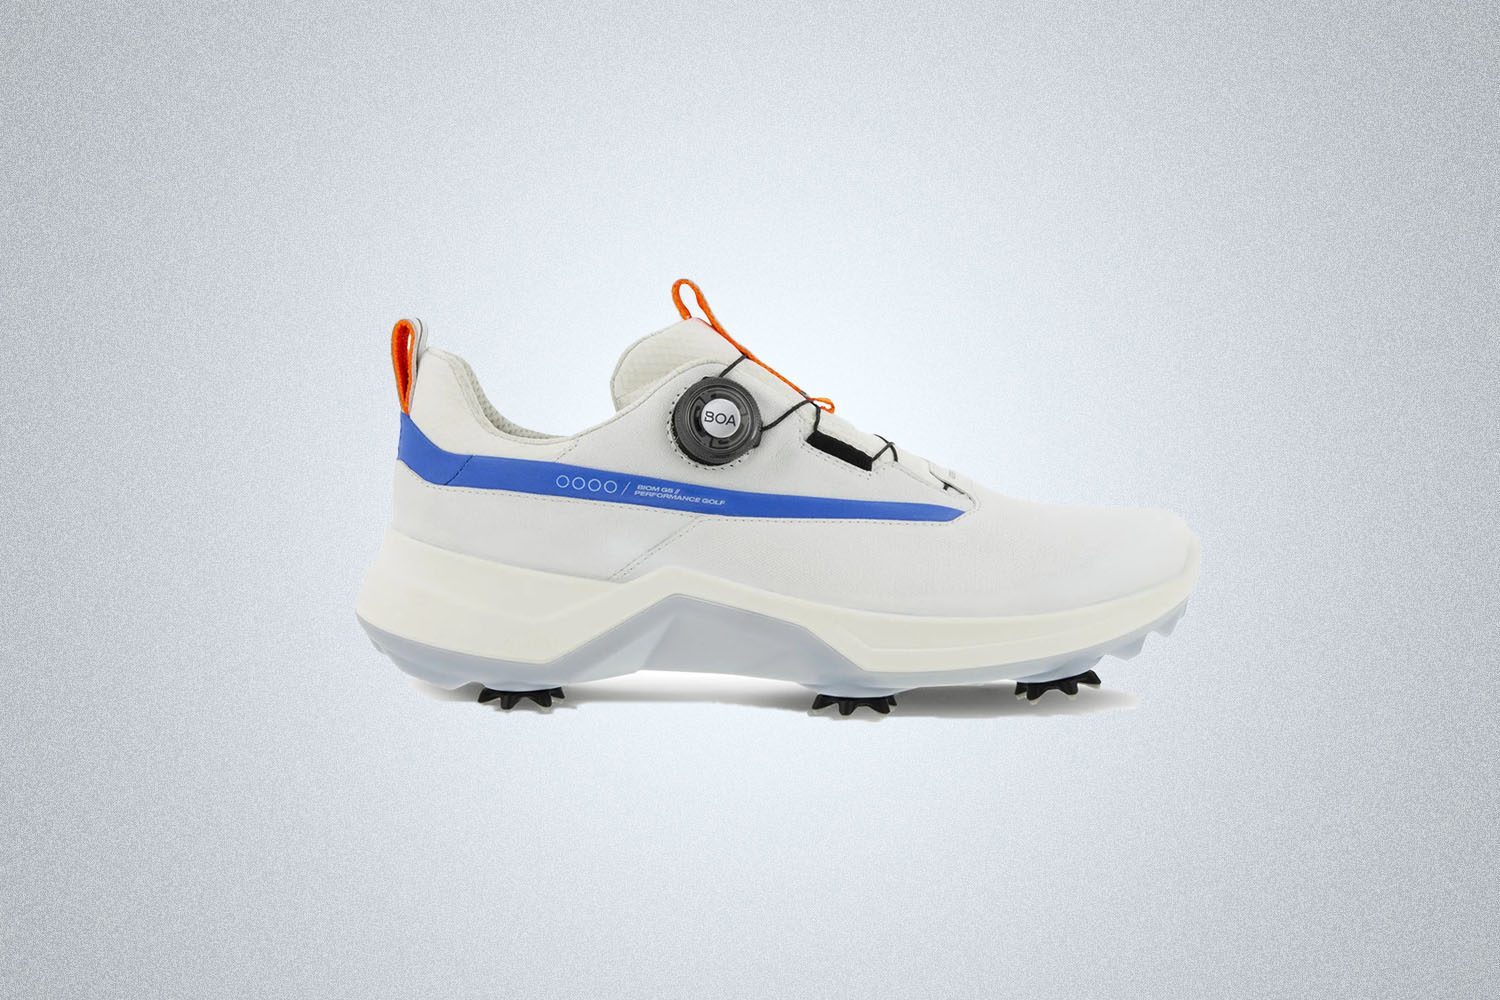 The Ecco Golf Biom G5 Shoe on a gray background